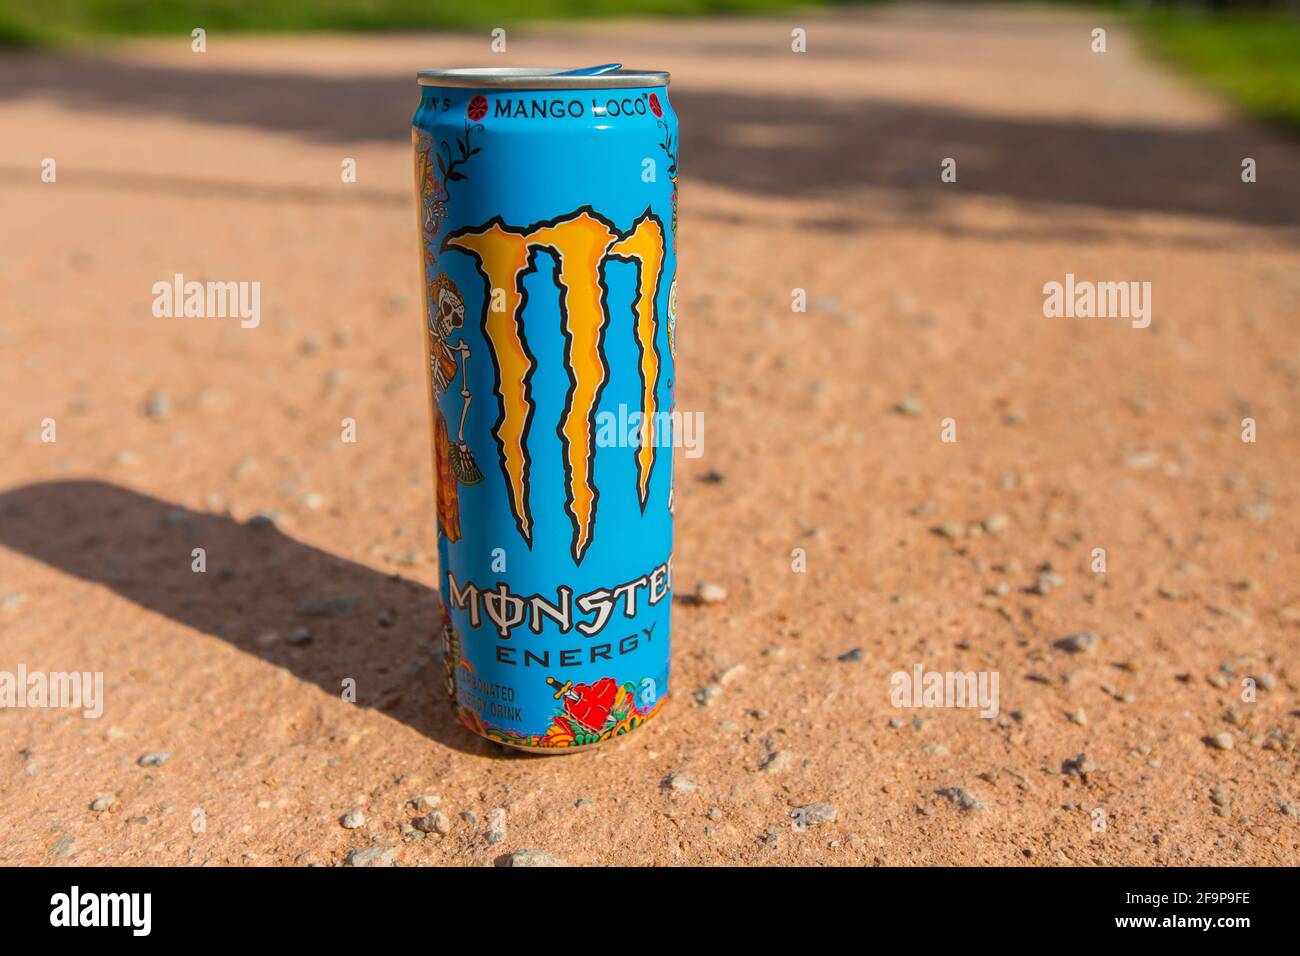 A can of Monster Energy drink on the running trail ground. Stock Photo